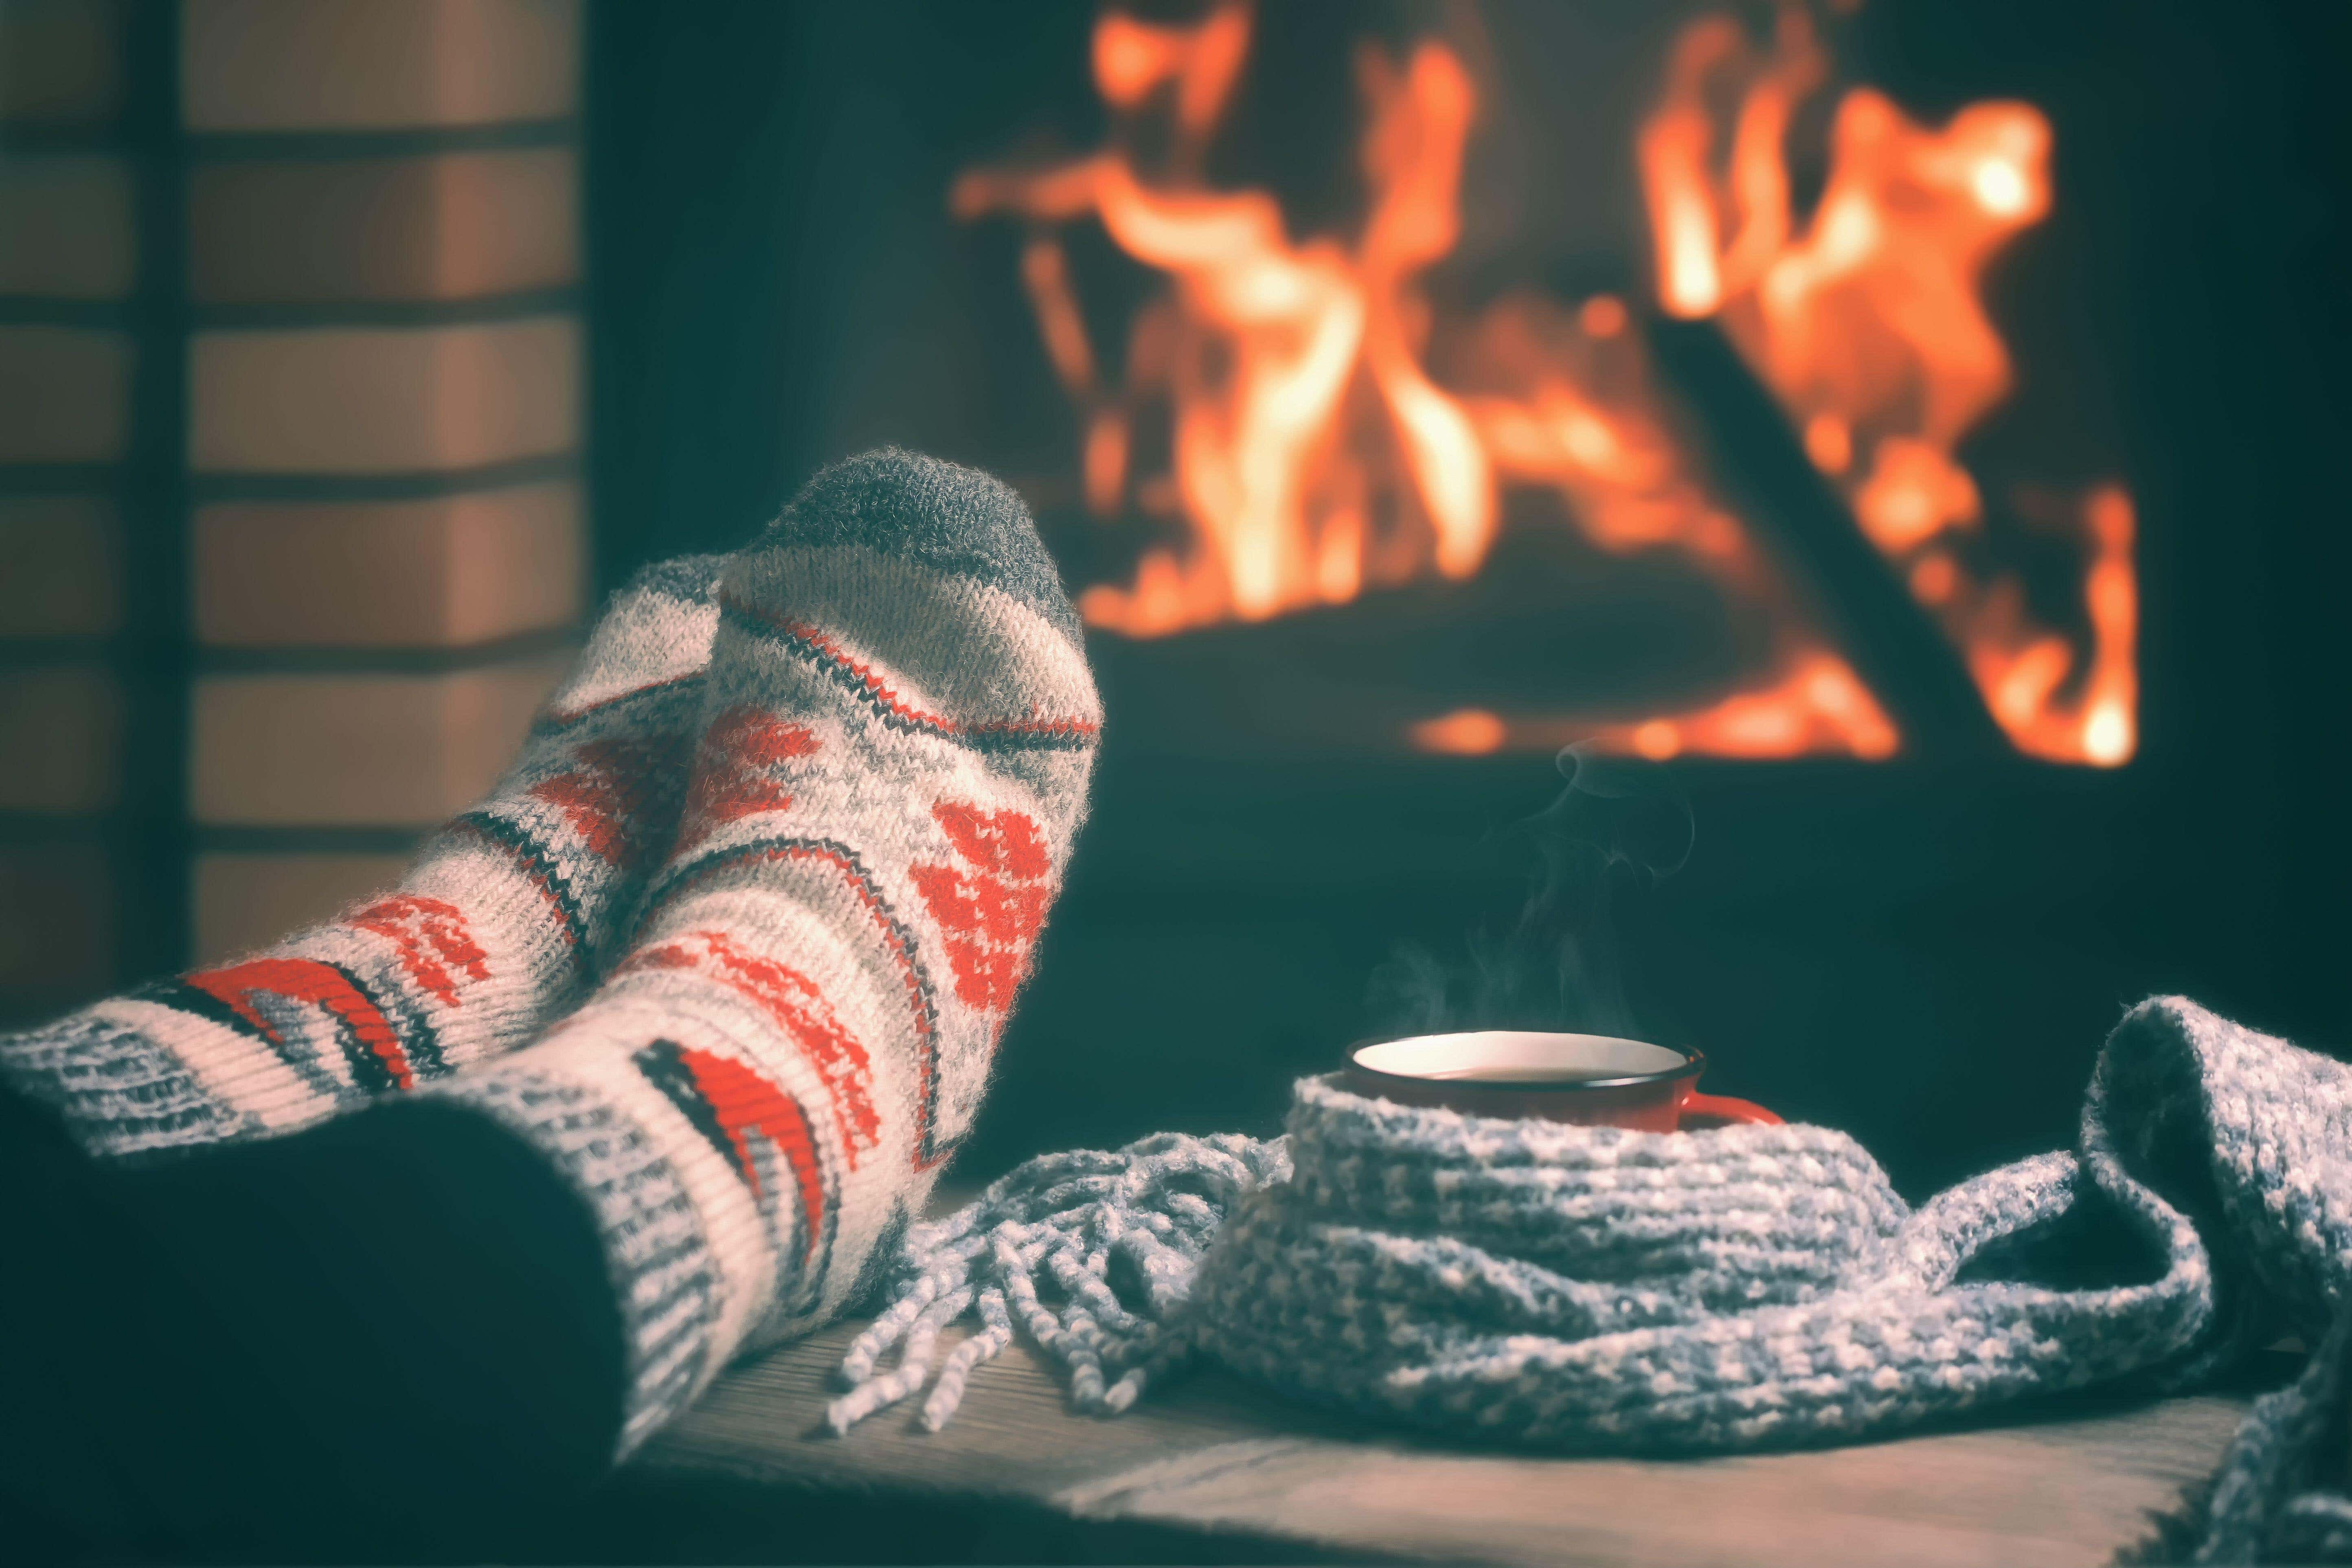 Tips for keeping warm as the 'wintry spell' begins